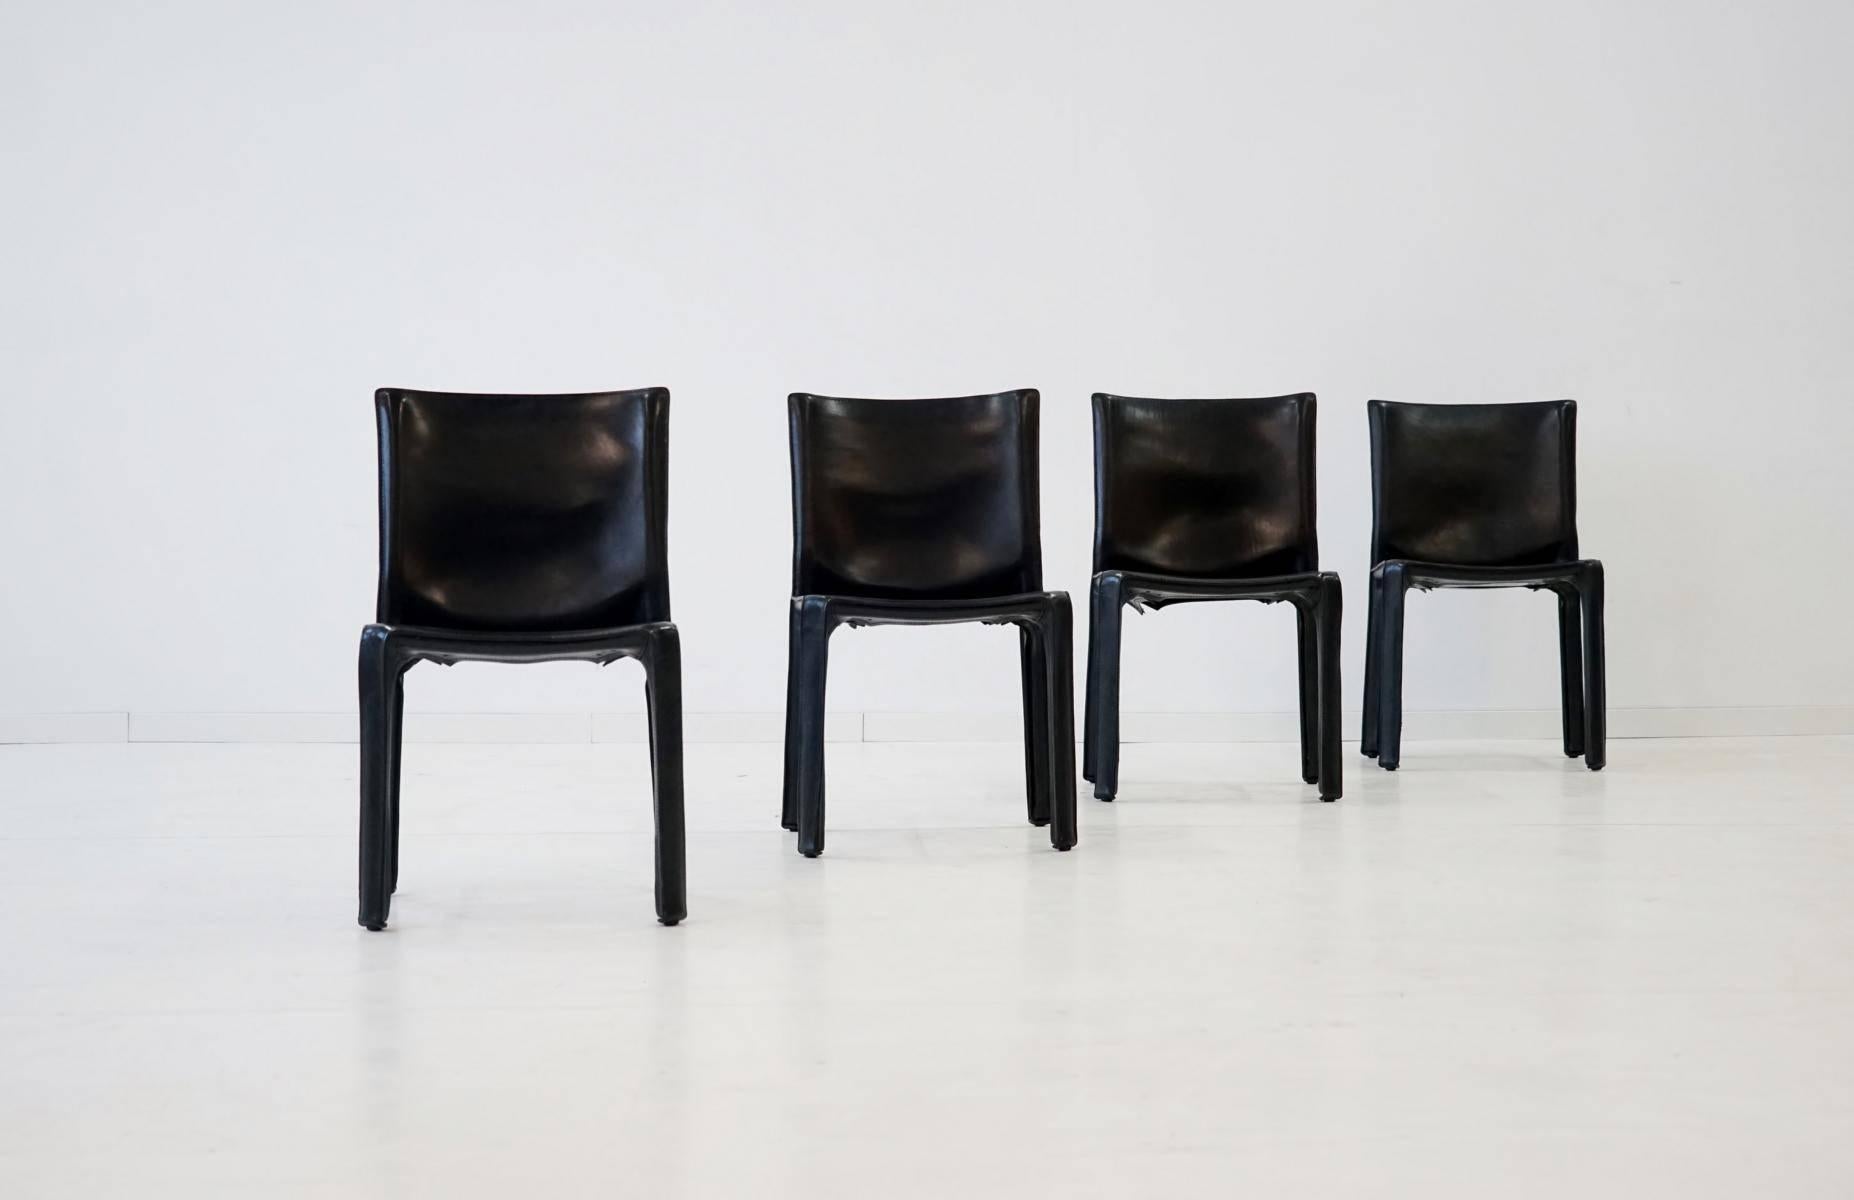 Set of four leather chair 412 CAB chairs by Mario Bellini for Cassina
412 CAB chair
Set of four CAB chairs in original black leather. Cassina Label on each chair underside. All four in excellent vintage condition.